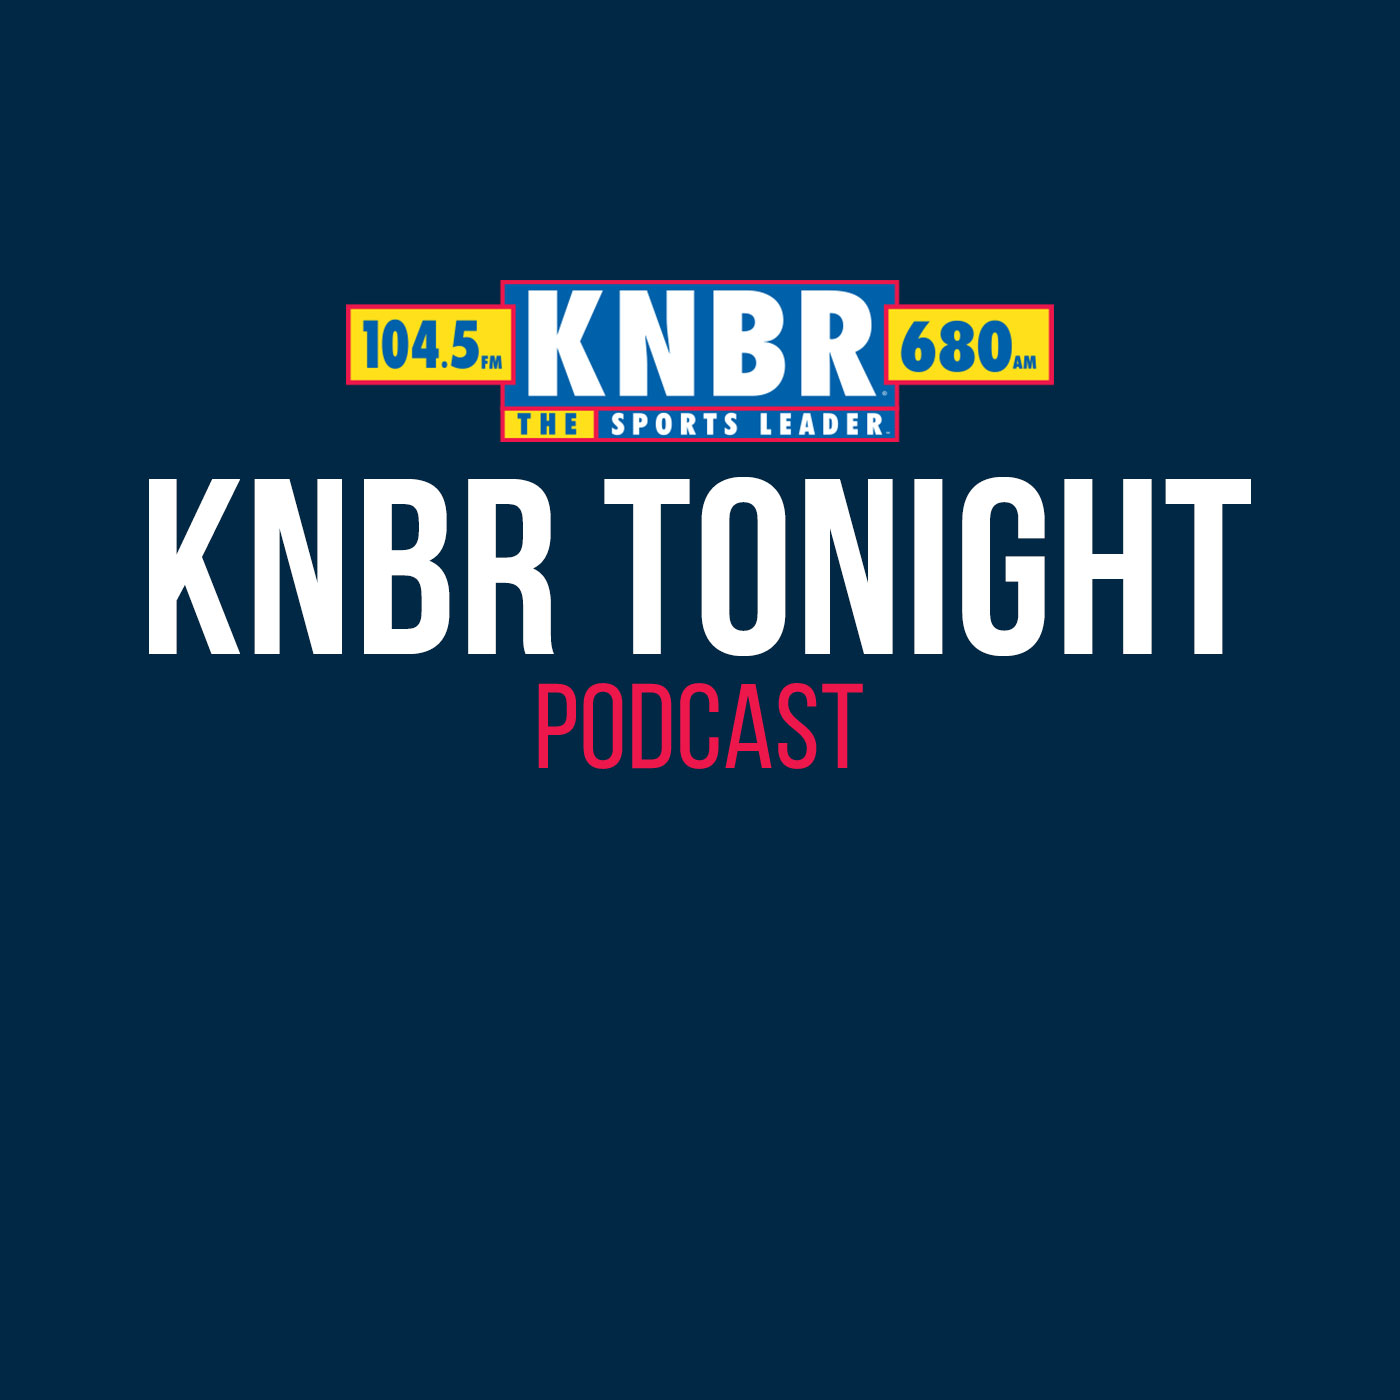 6-16 Air Force Pilot, Jeremiah "Weed" Tucker, joins KNBR Tonight with FP Santangelo to talk about how he became an F-16 pilot, How good/accurate is the new Top Gun movie and how he got his call sign